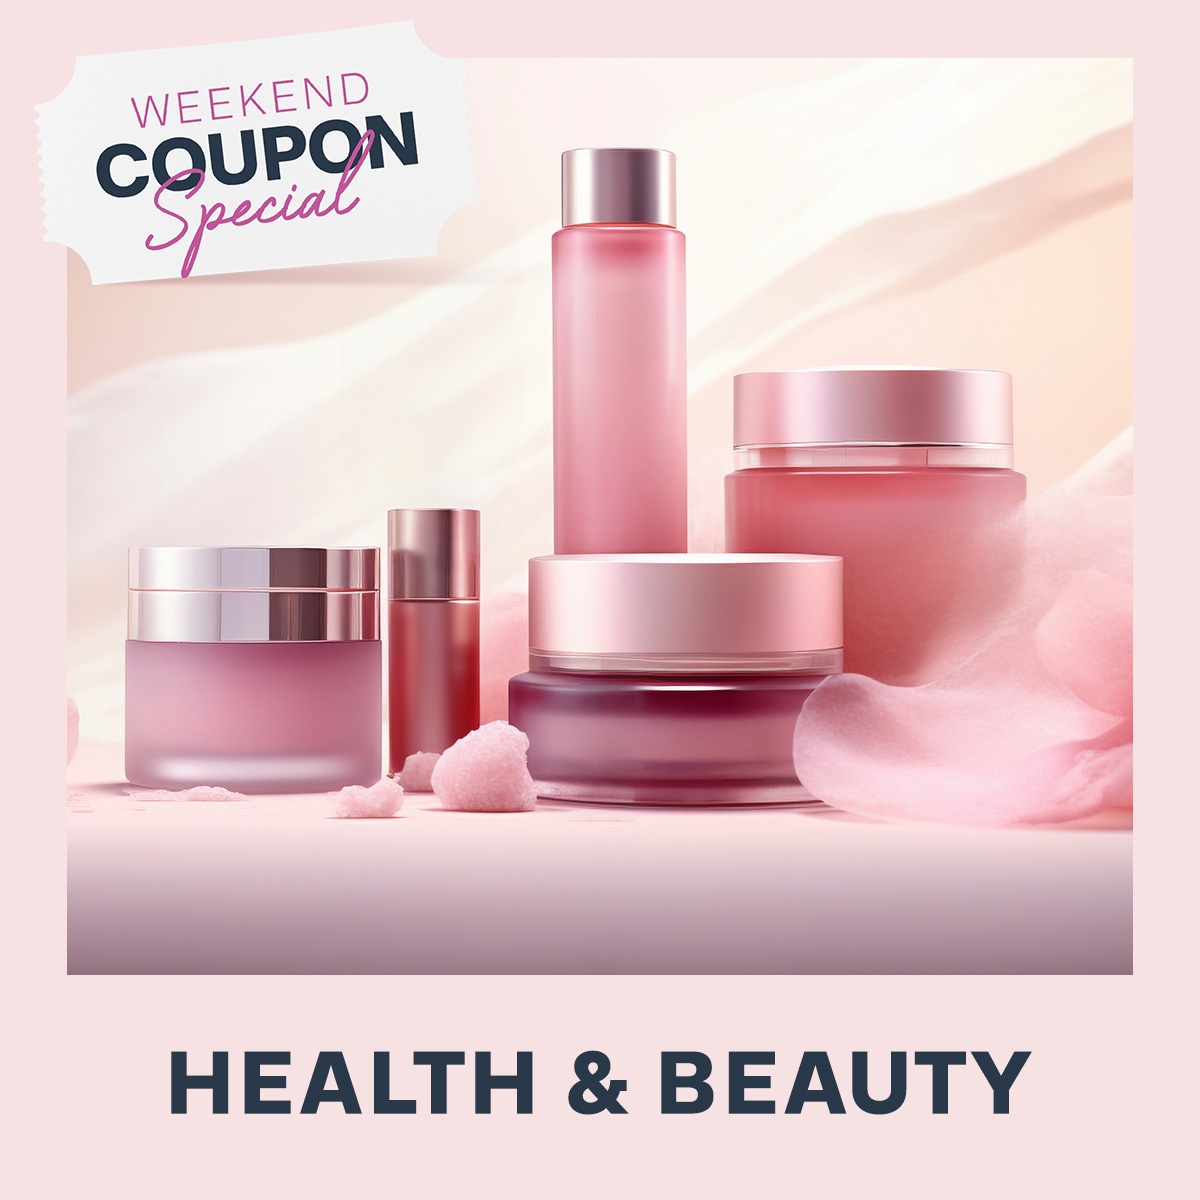 Weekend Health & Beauty Coupon Special